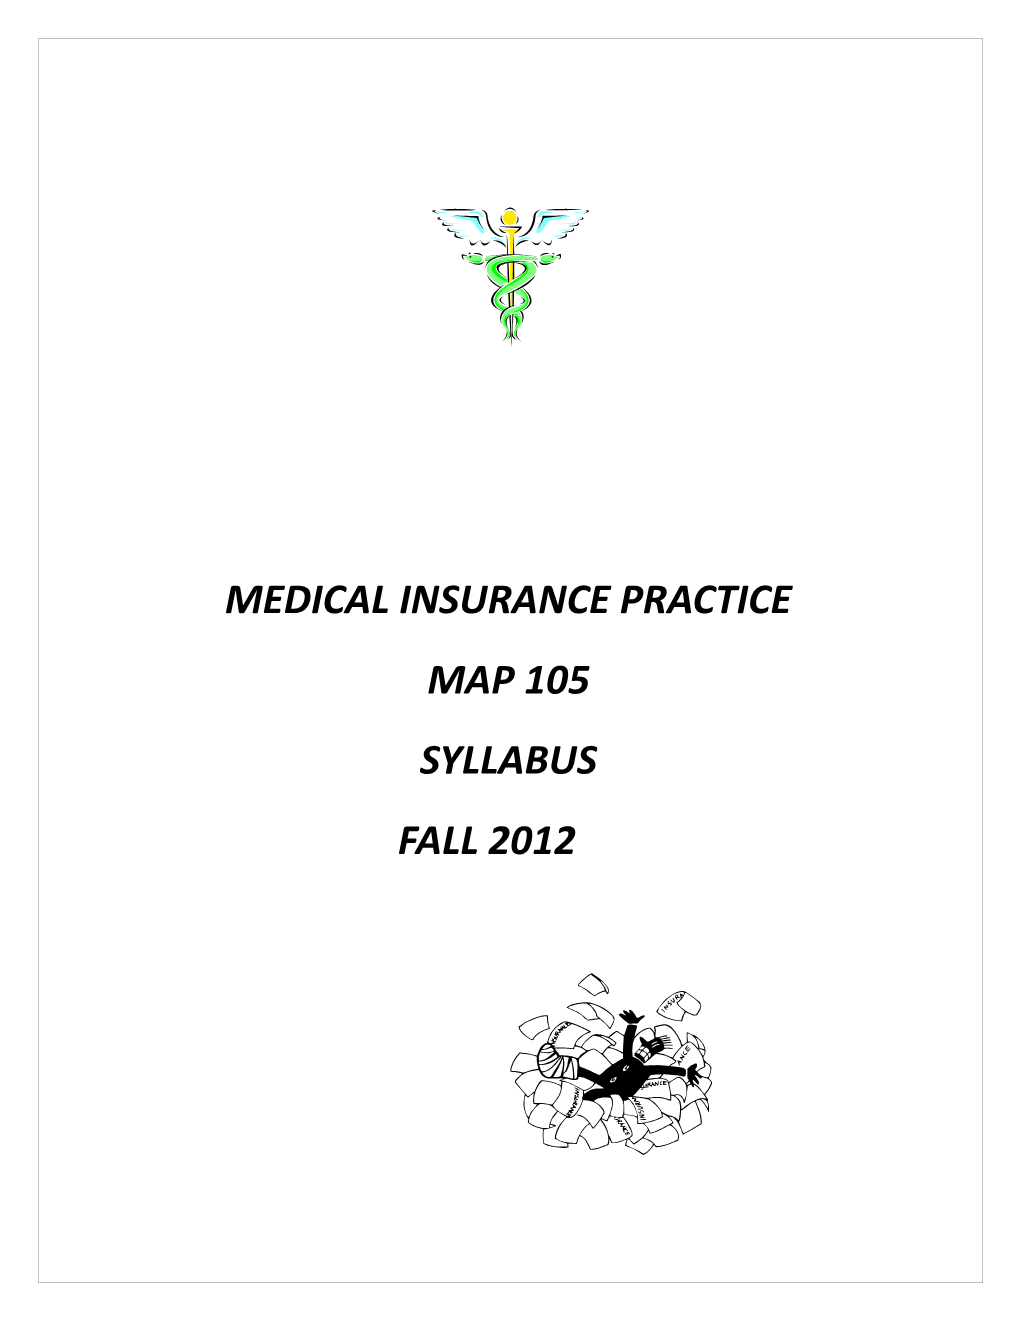 Medical Insurance Practice